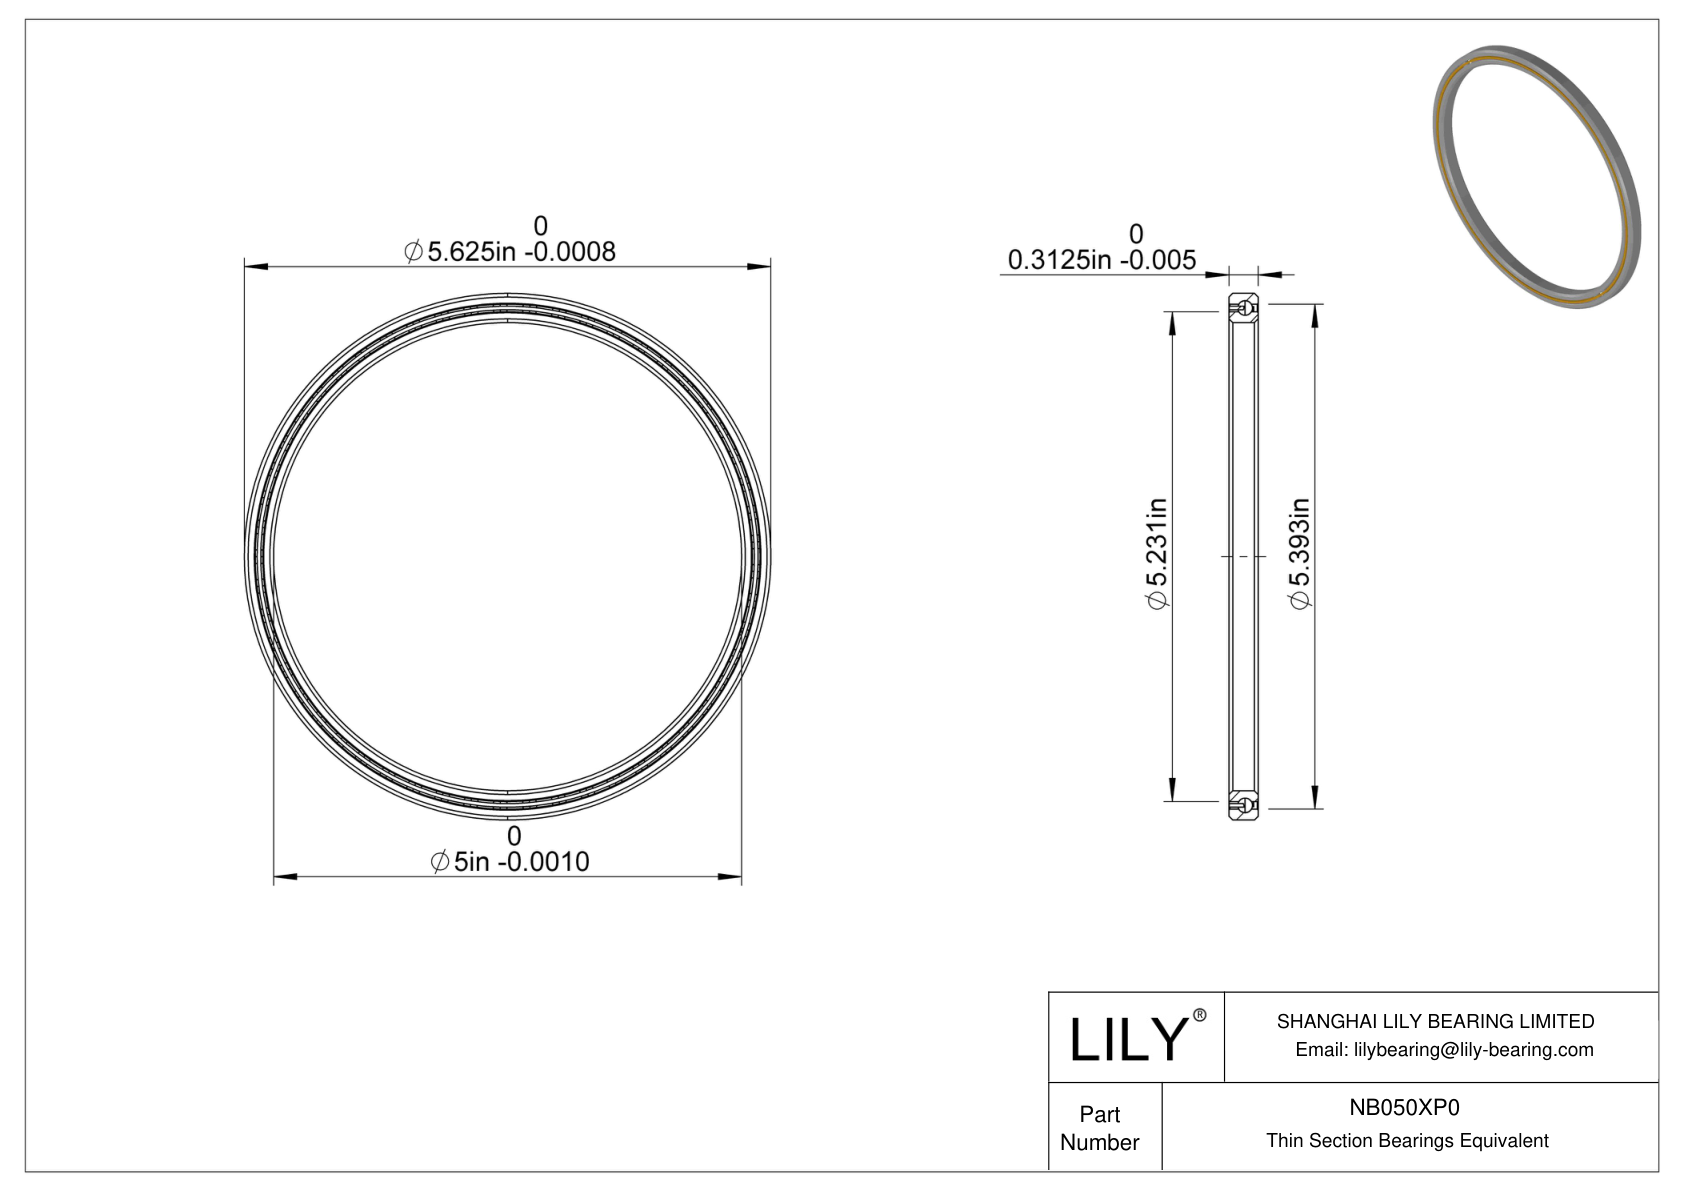 NB050XP0 Constant Section (CS) Bearings cad drawing